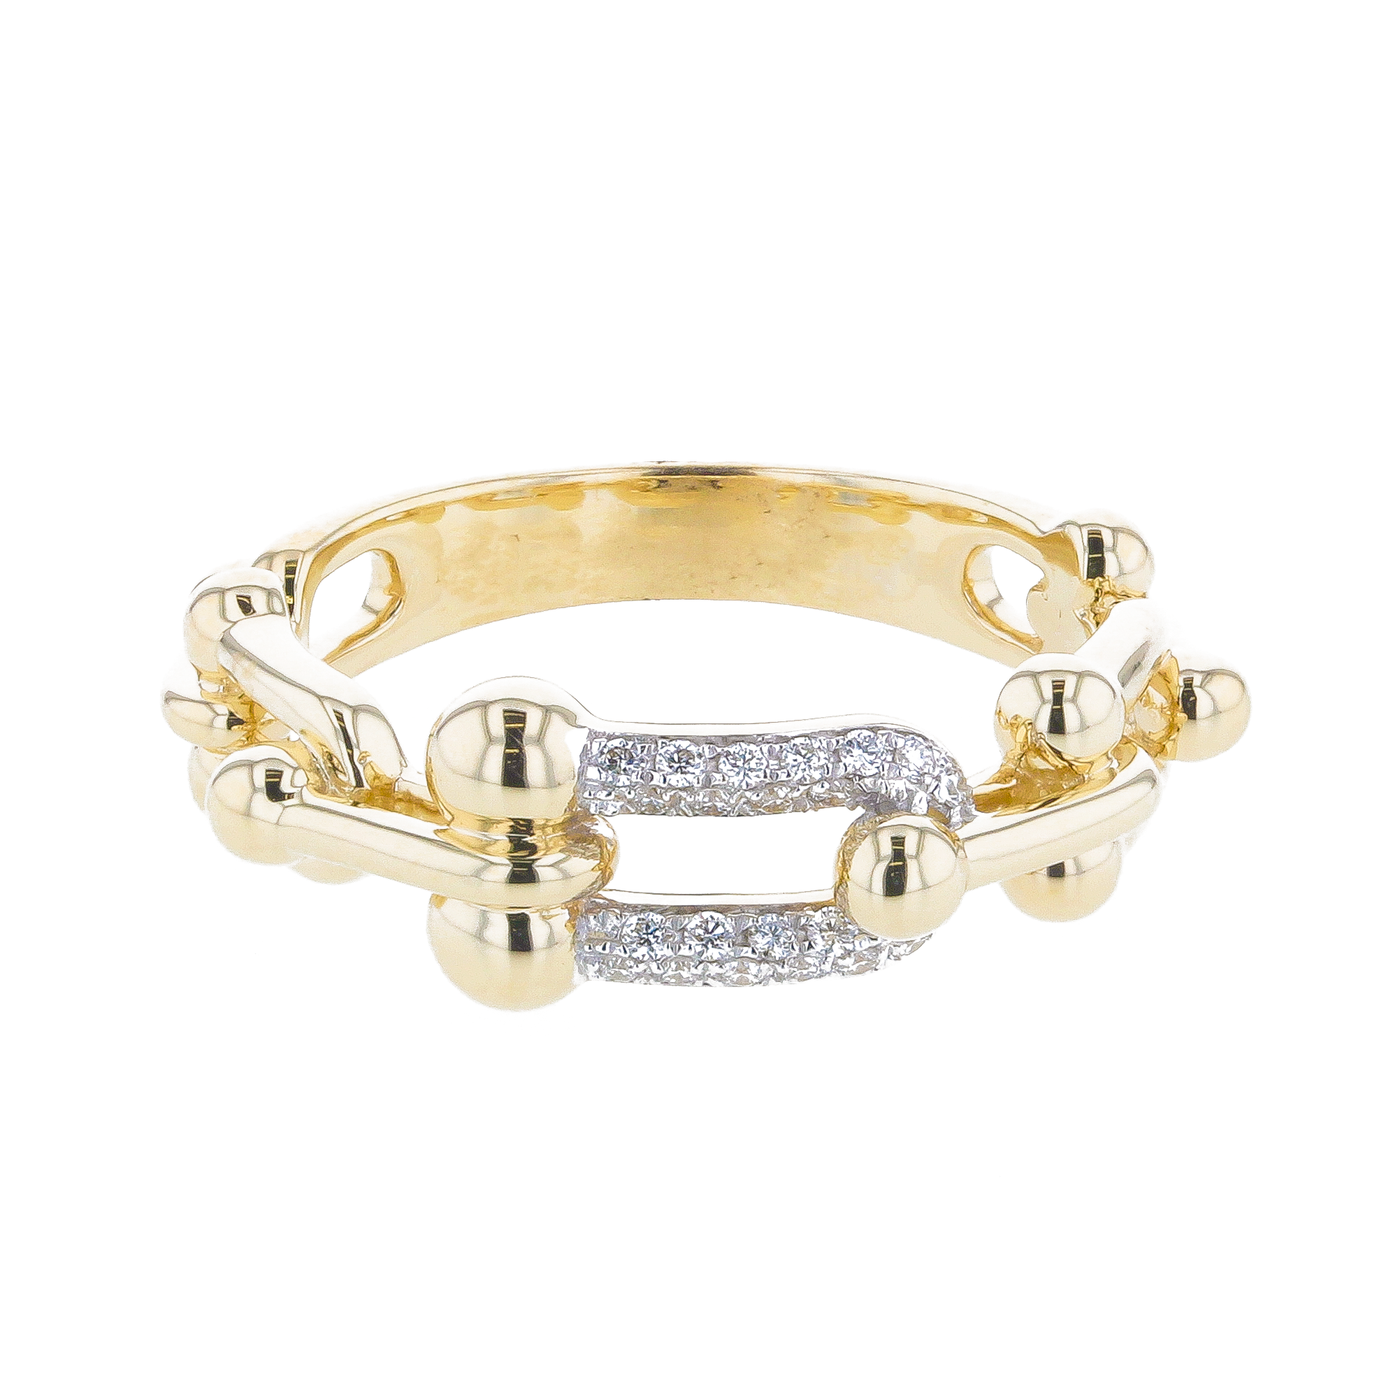 "The Link Pavé" 0.13 Diamond Ring in 14k Yellow Gold